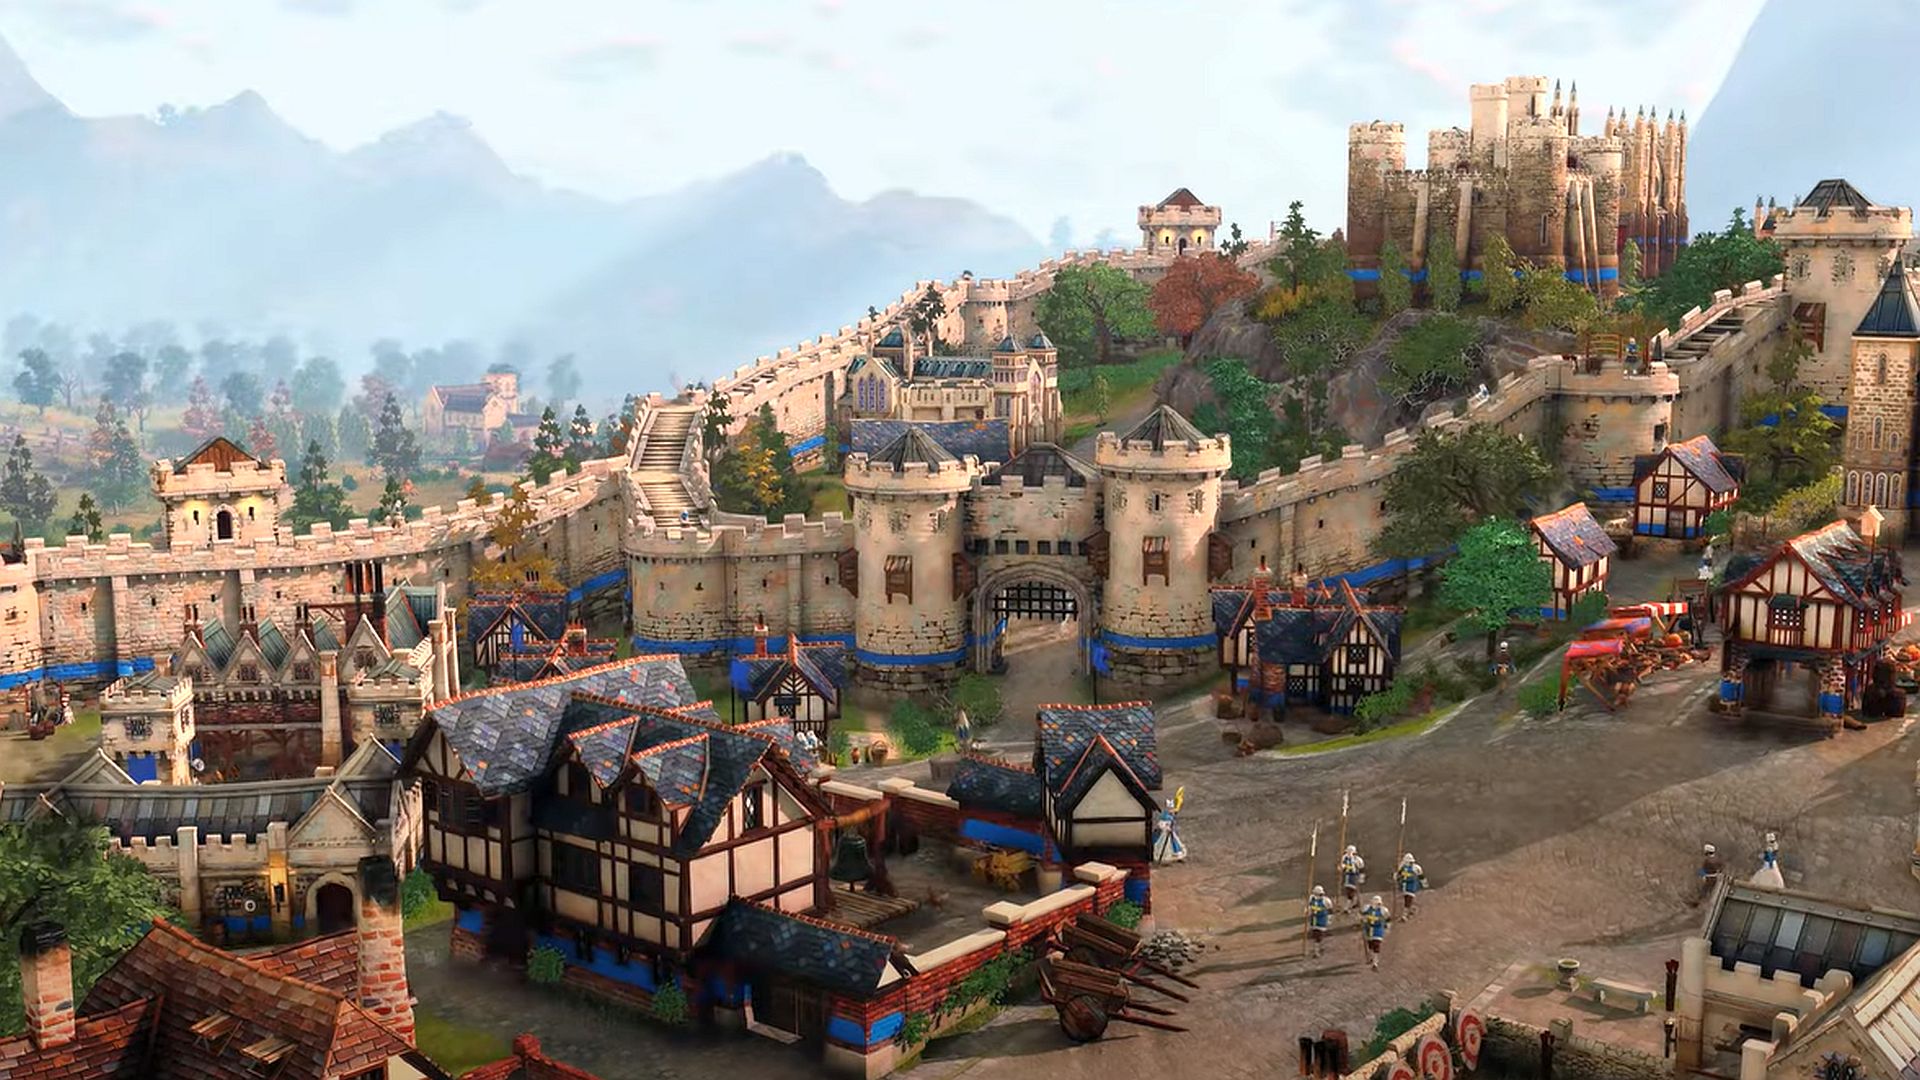 Age of Empires 4 “gameplay, civilizations, campaigns, and more” to be shown next month